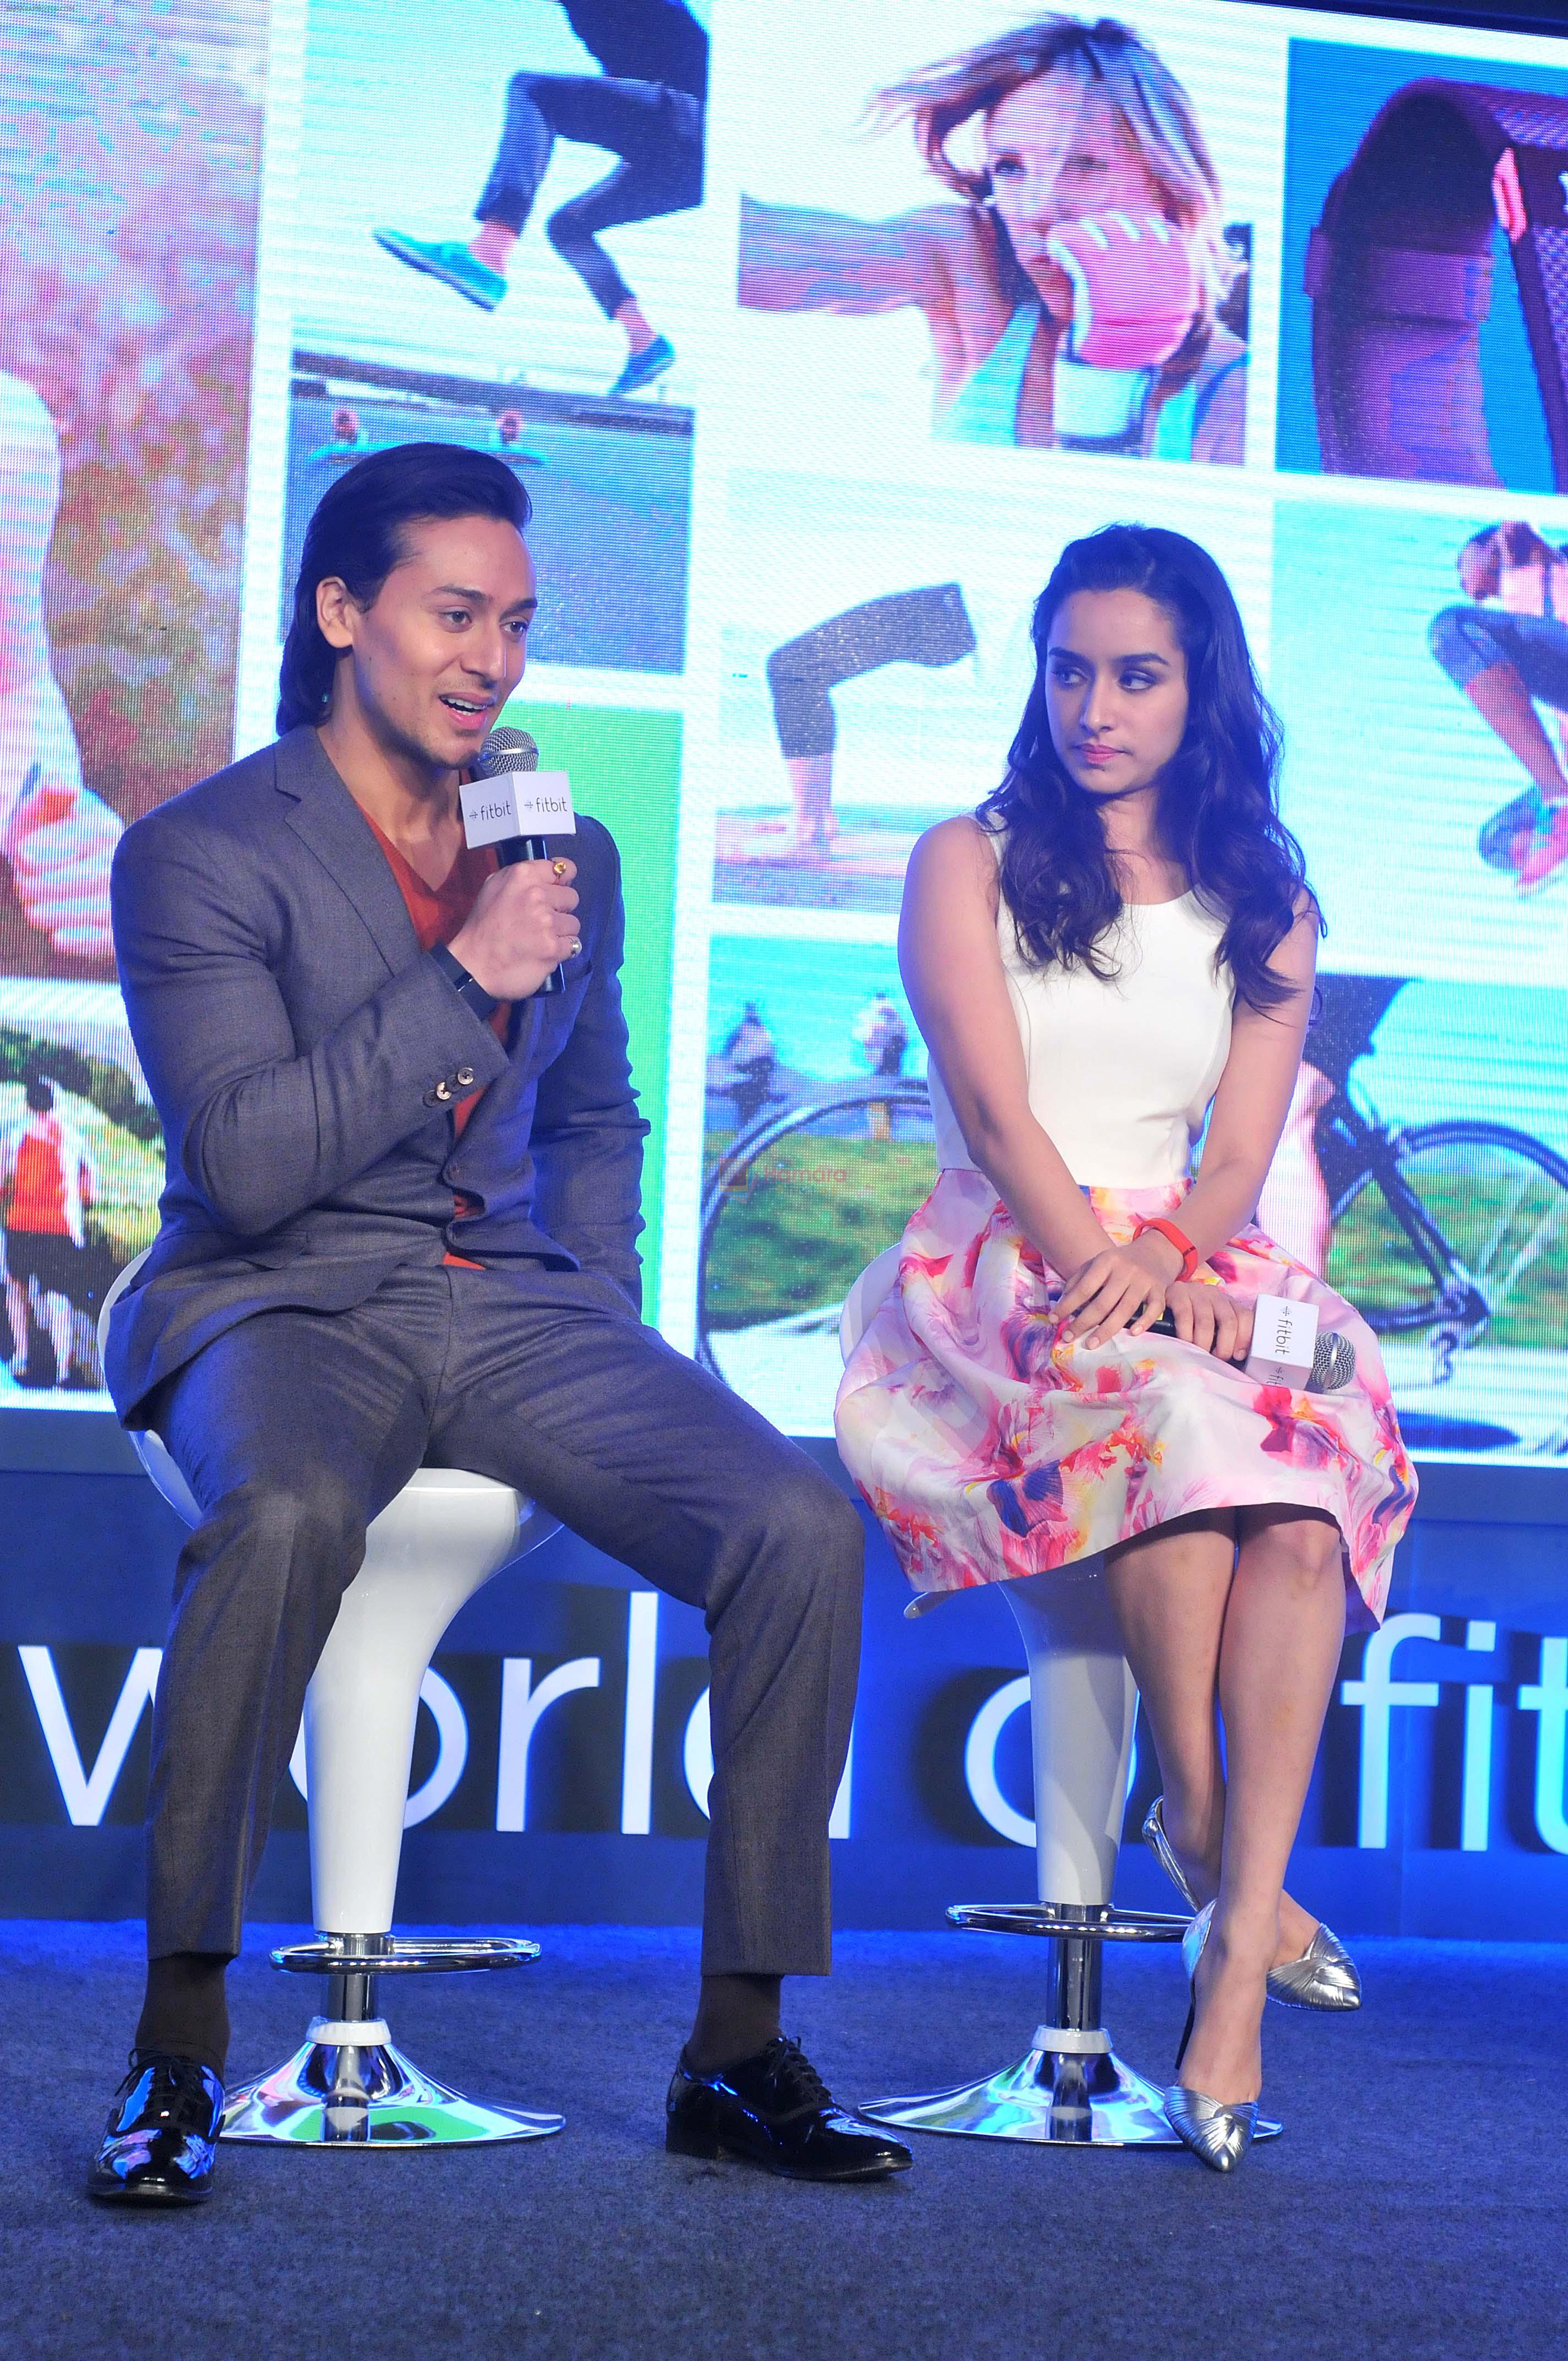 Tiger Shroff and Shraddha Kapoor in Delhi for fitbit launch in Mumbai on 25th Aug 2015